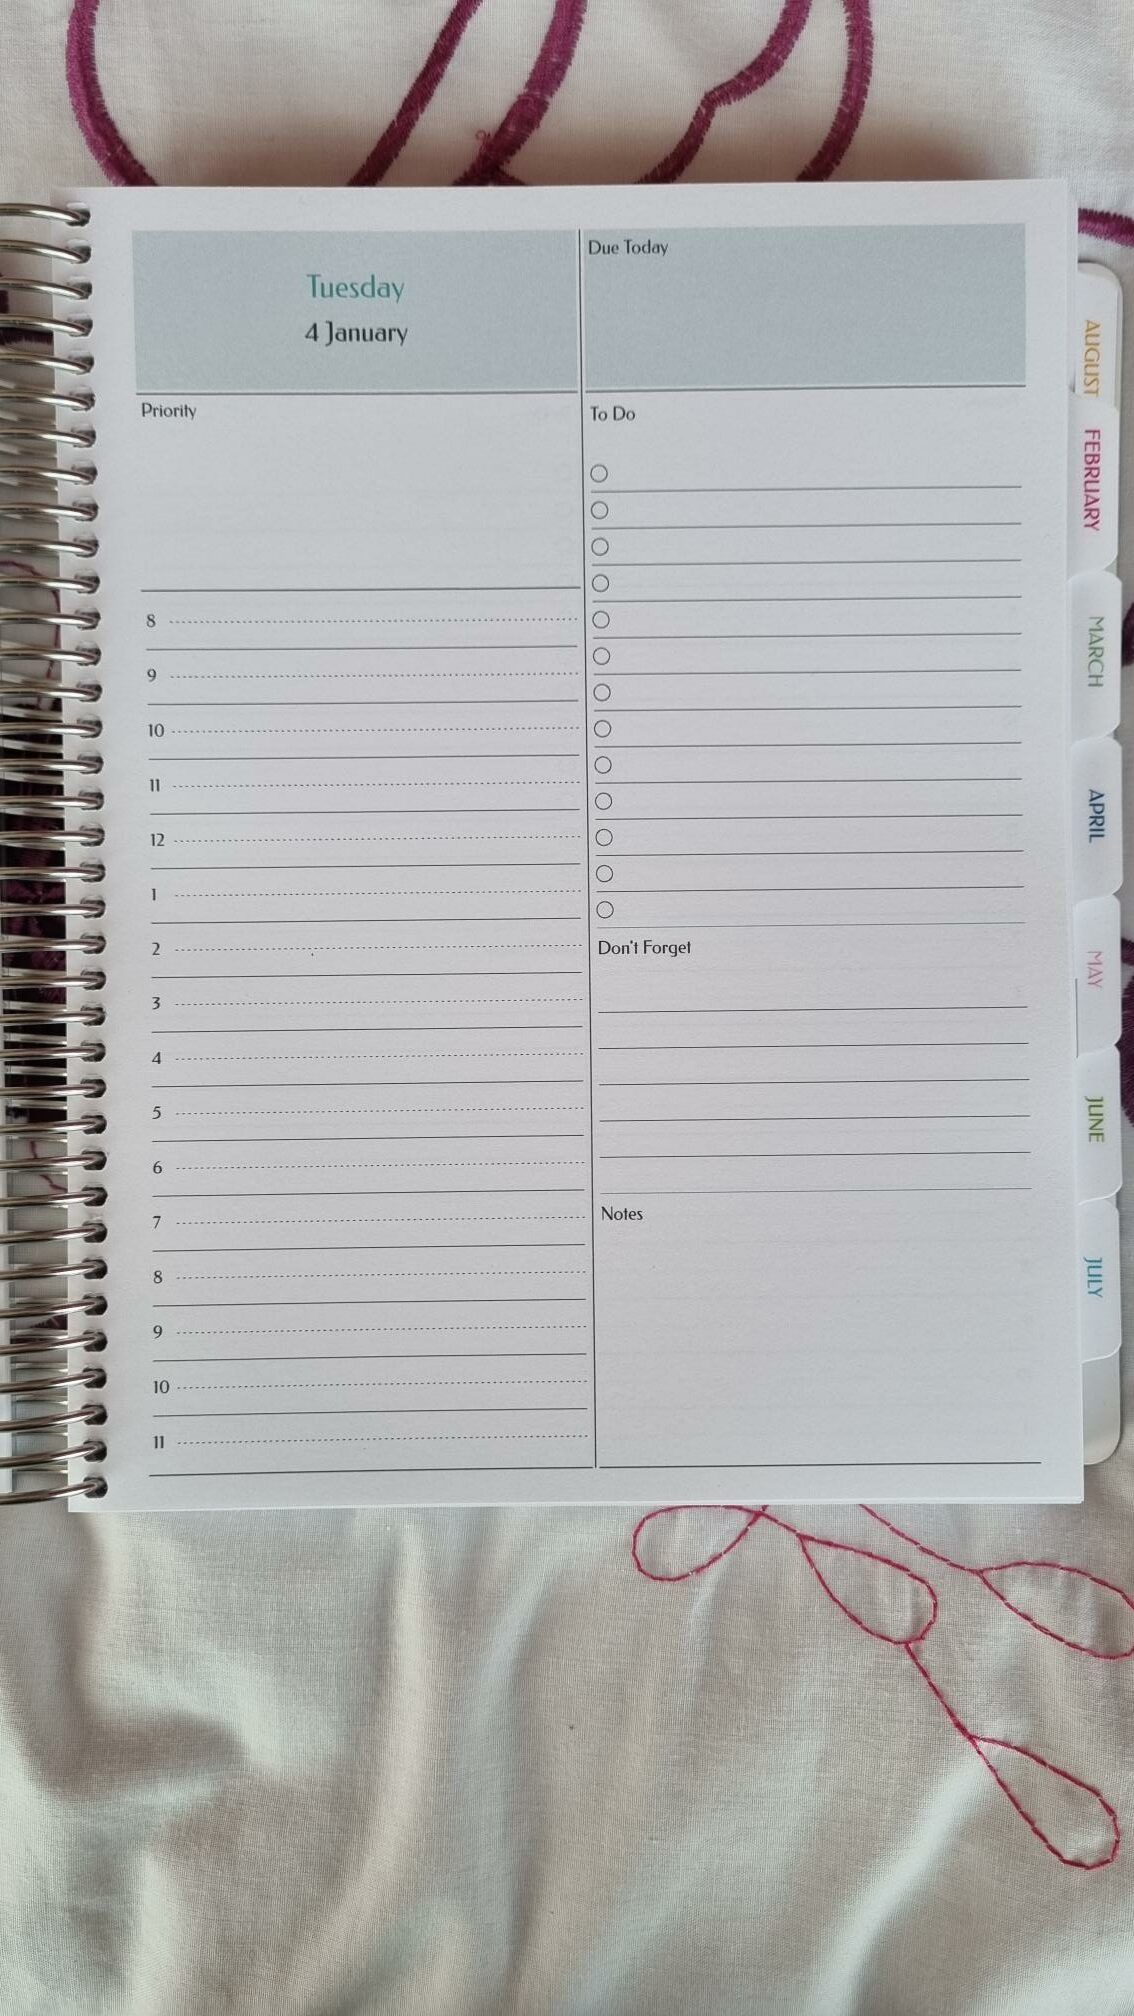 Agendio Layout, with Tuesday taking up one whole page. One column is labelled Priority with numbers. The other has To Do, Don't Forget, and Notes